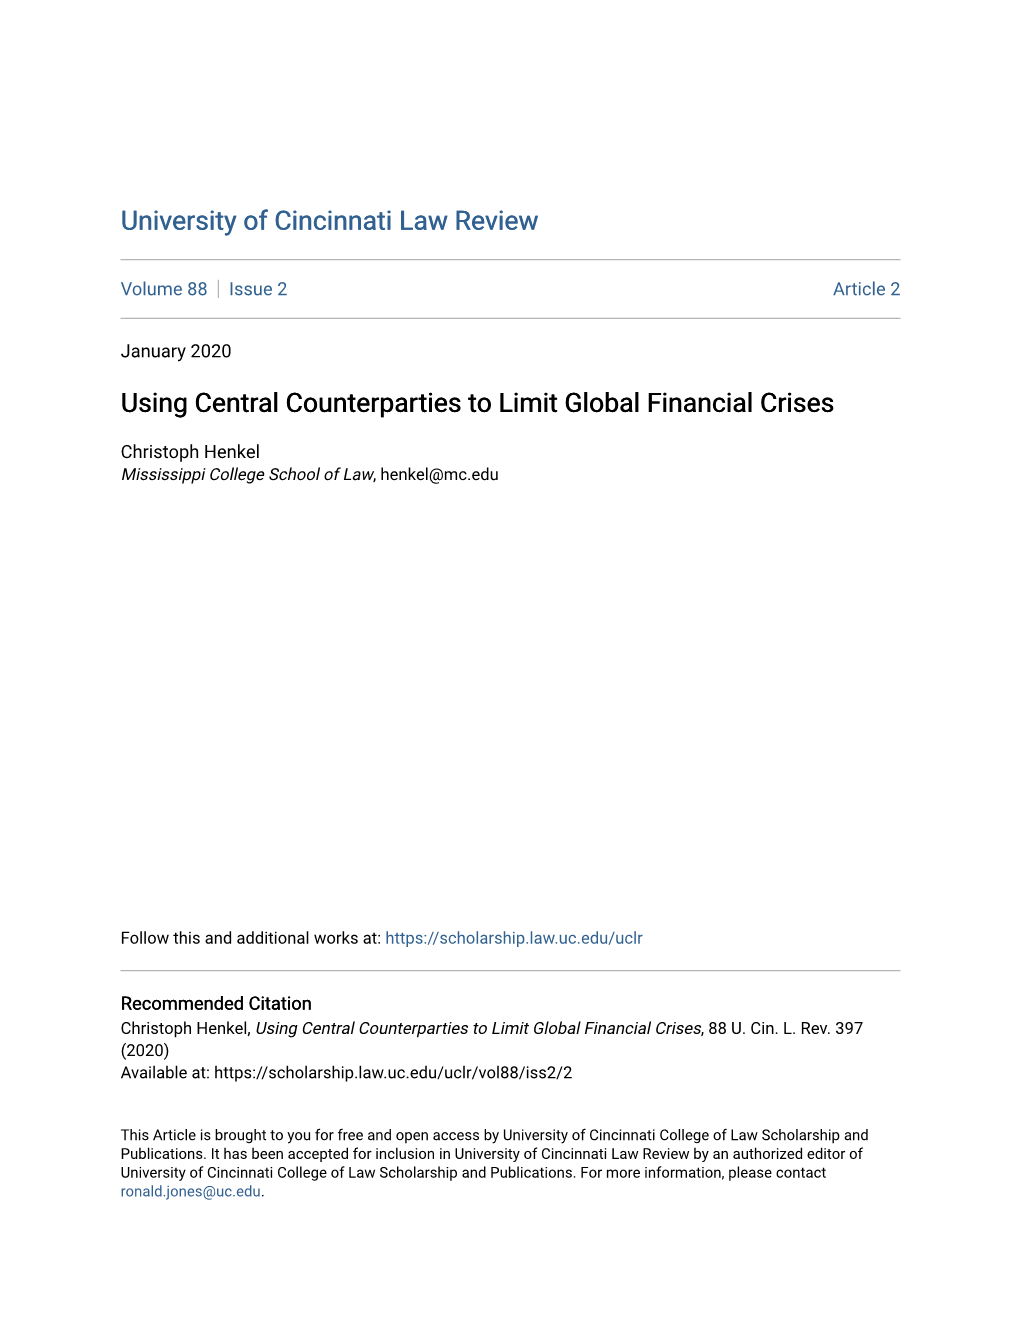 Using Central Counterparties to Limit Global Financial Crises